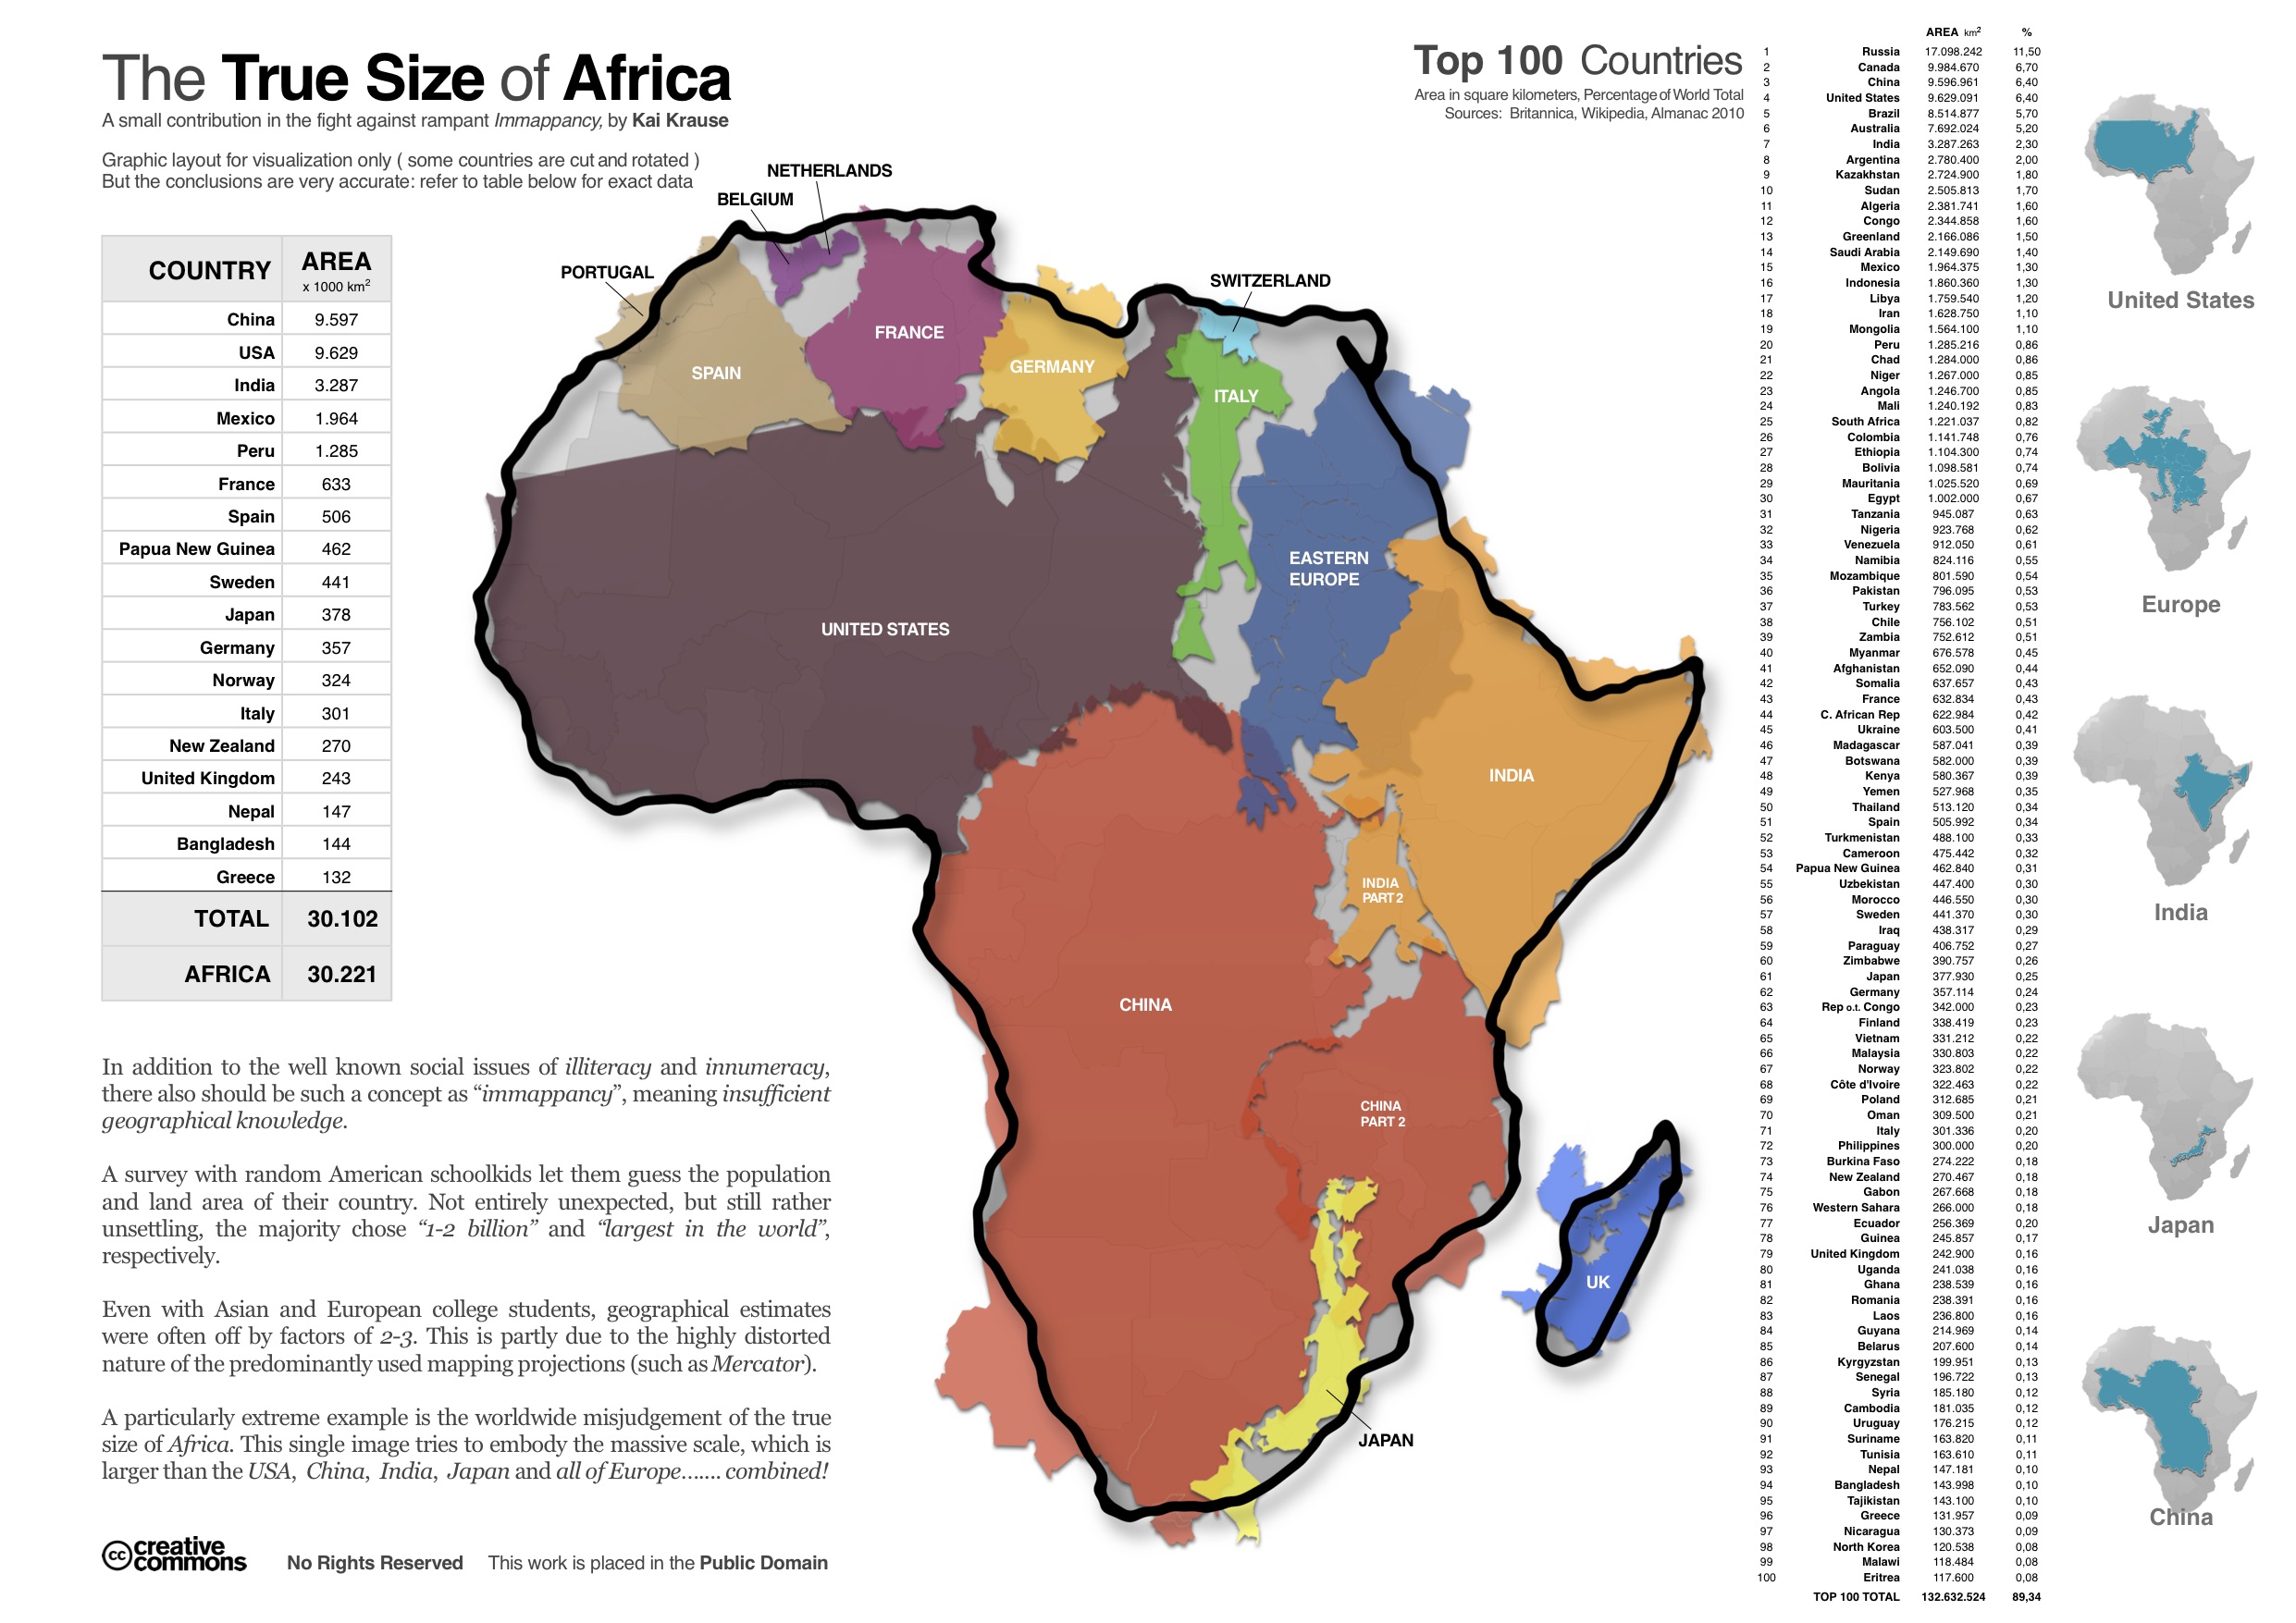 The Truth about Africa